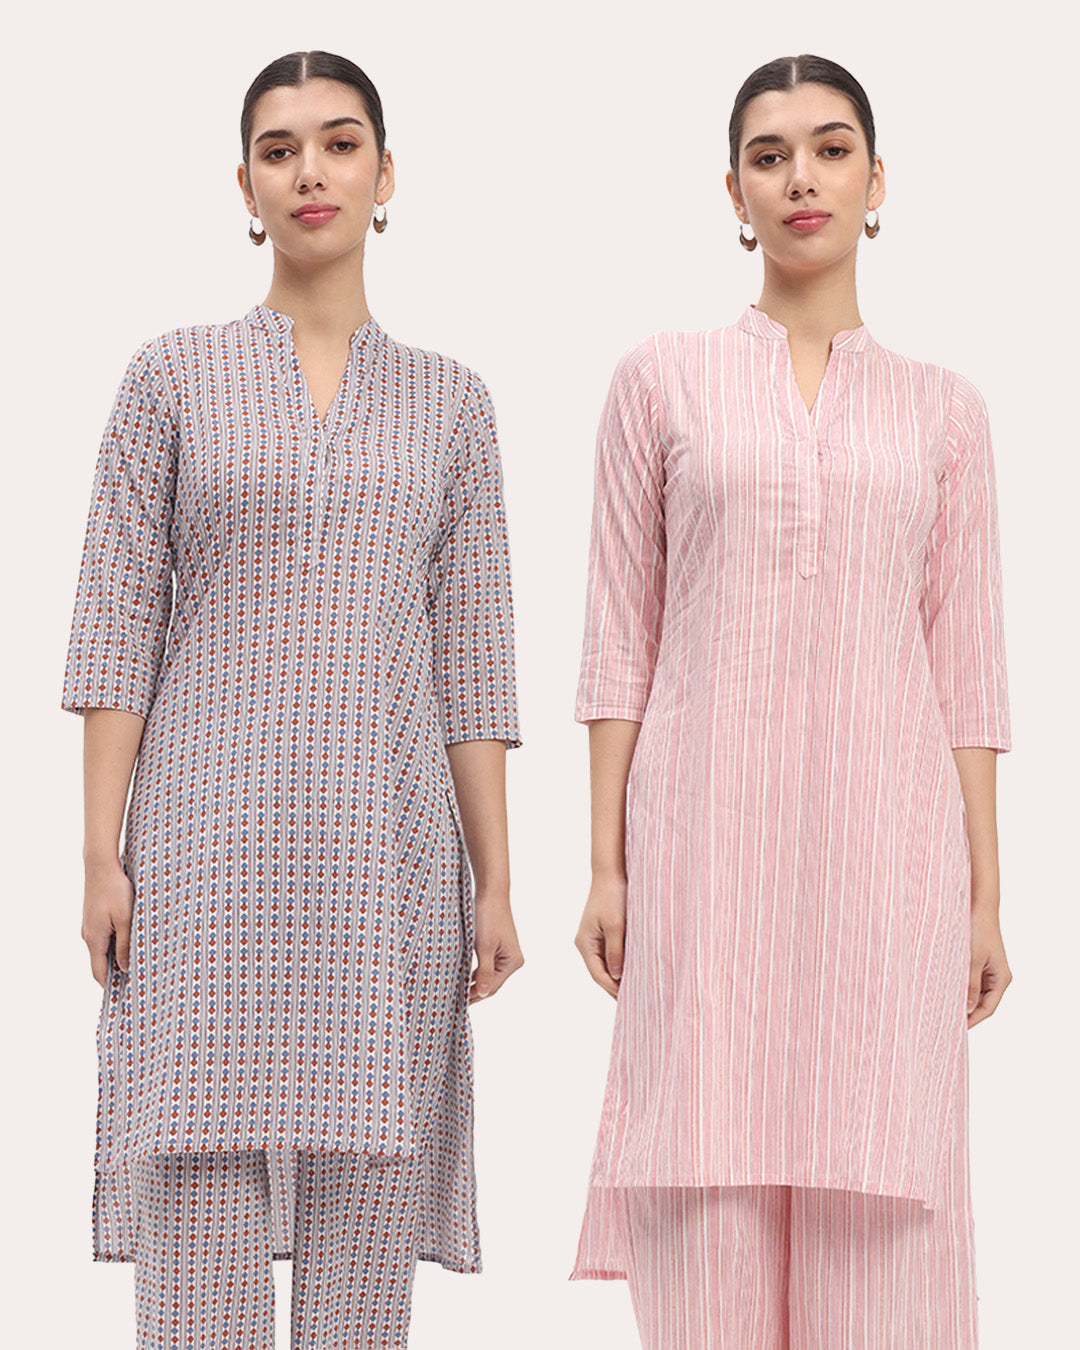 Copy of Combo: Ivory Quadrangle & Pink Chic Lines High-Low Printed Kurta (Without Bottoms)